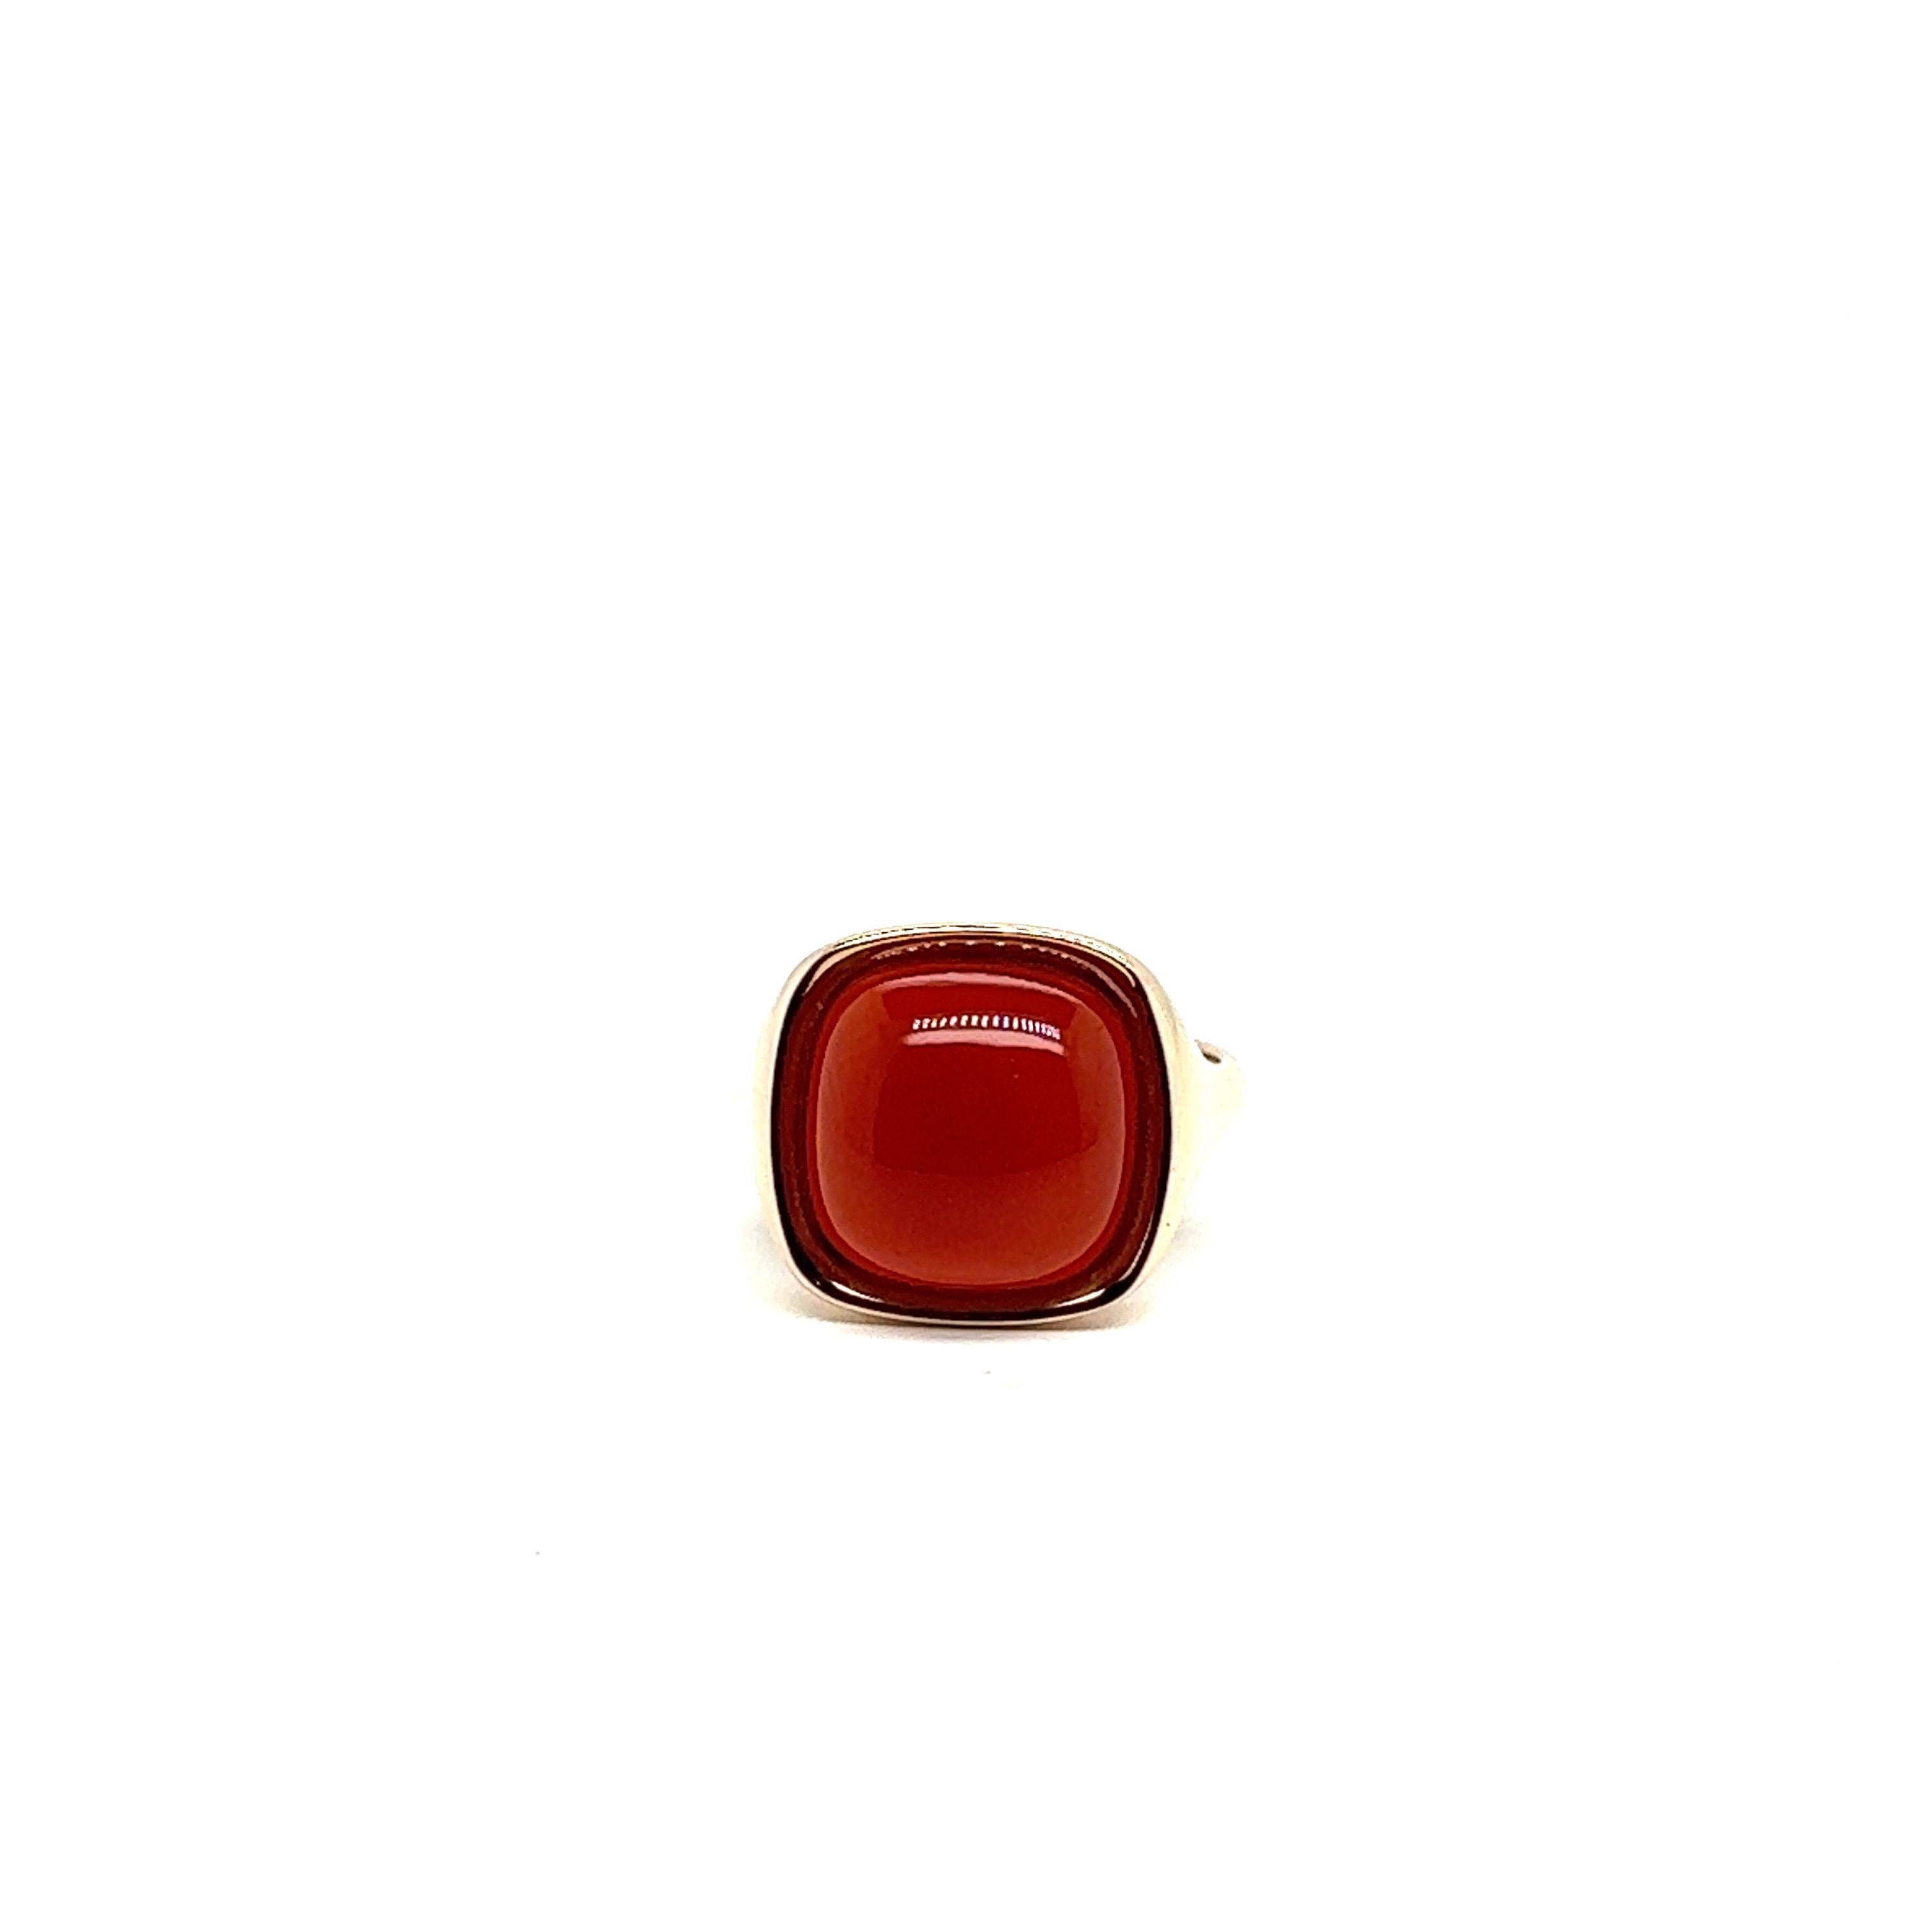 Discover this magnificent modern French signet ring topped with a cabochon-cut red onyx. Crafted in 18-carat pink gold, this piece is both elegant and contemporary, ideal for those looking for a unique and refined accessory. With its rounded shapes